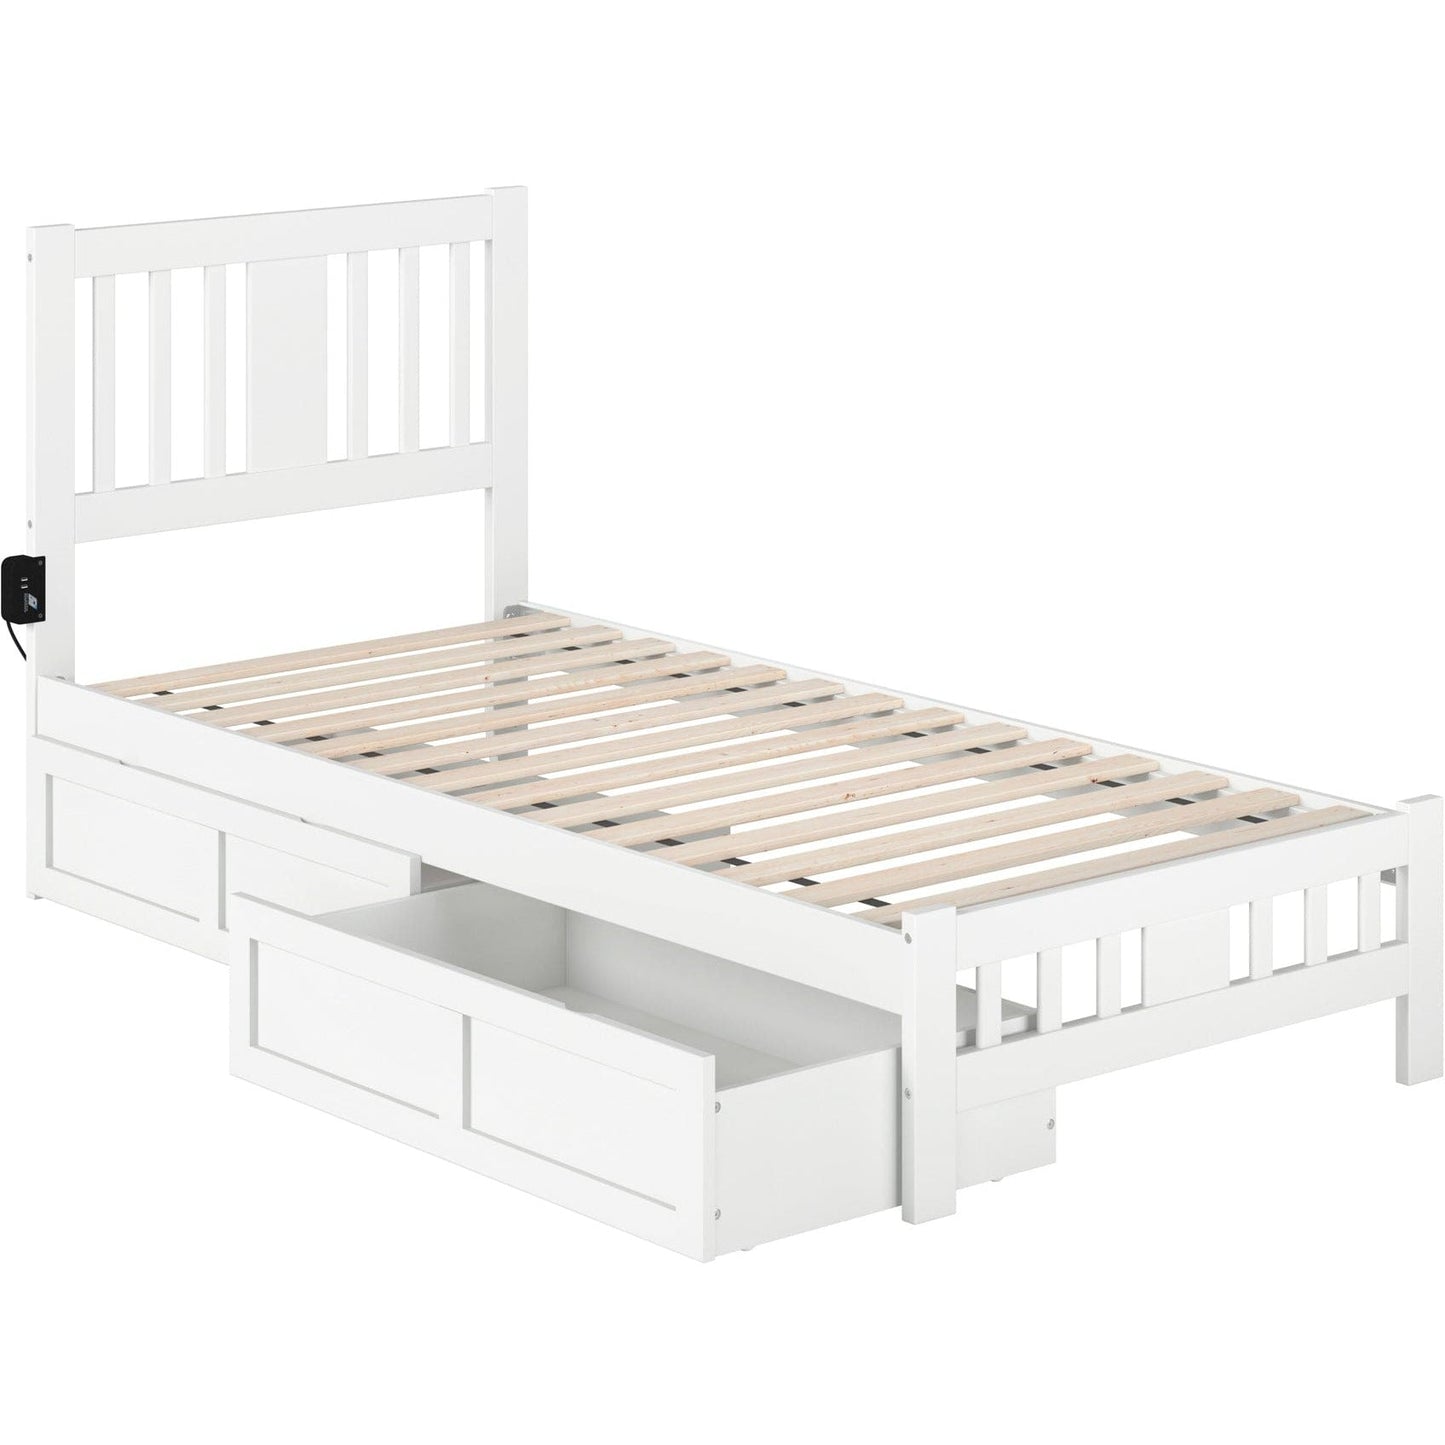 AFI Furnishings Tahoe Twin Extra Long Bed with Footboard and 2 Drawers in White AG8963412